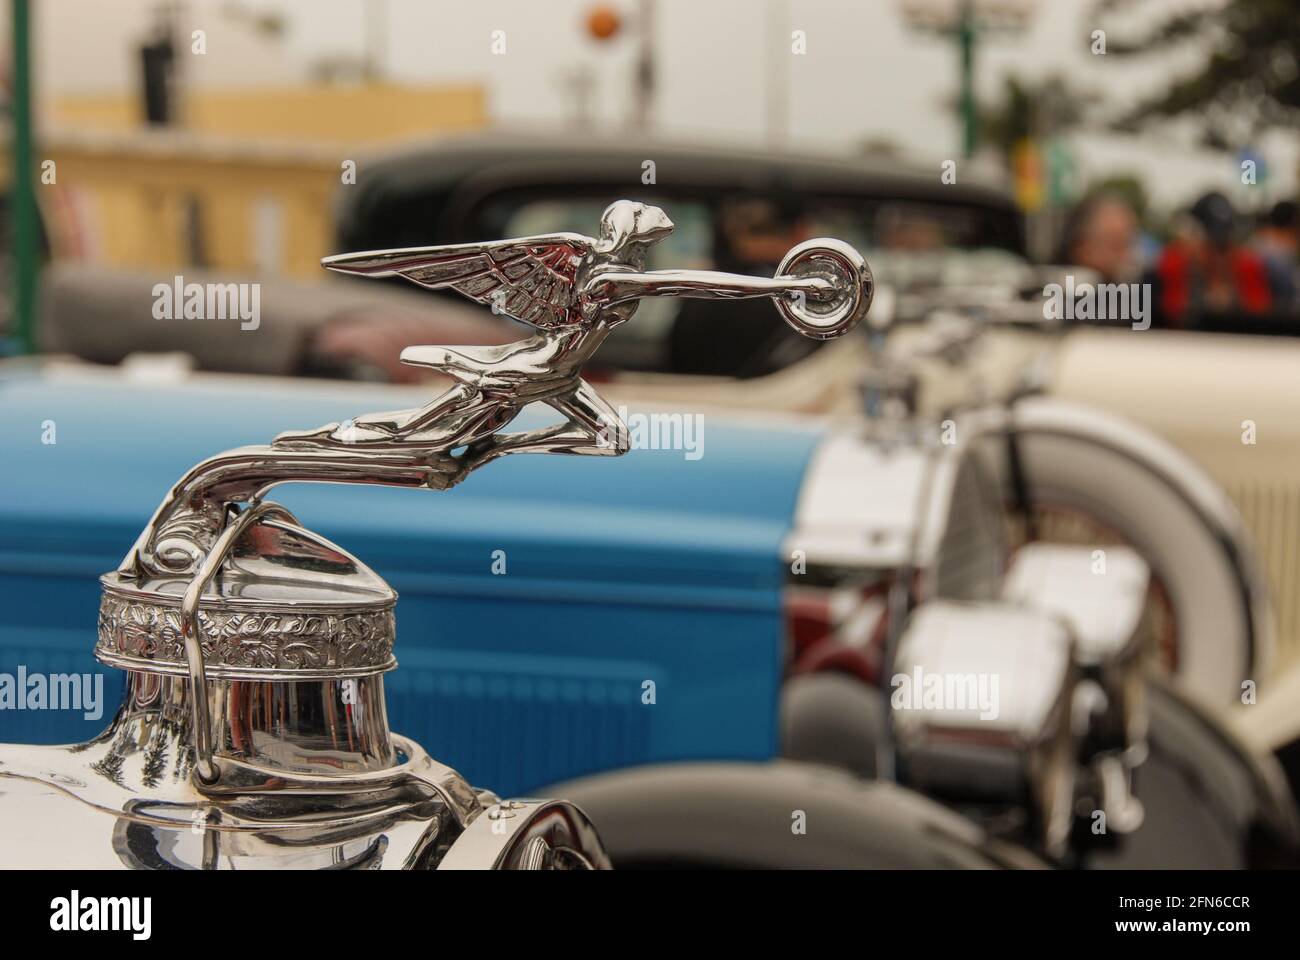 Hood Ornament of a Packard classic car at Art Deco Weekend in Napier. Stock Photo